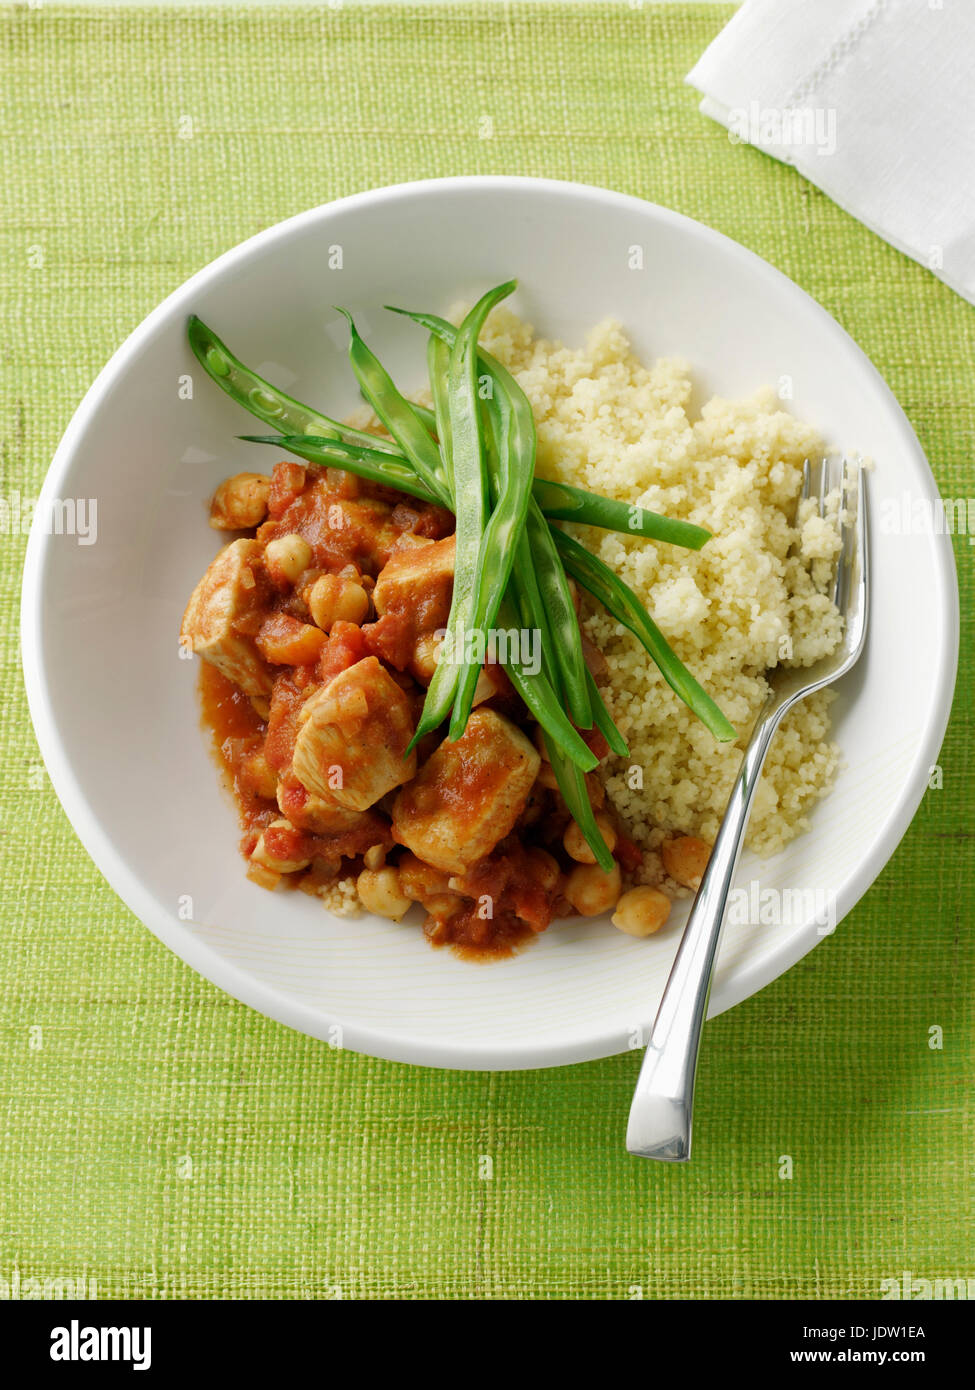 Bowl of cous cous with green beans Stock Photo